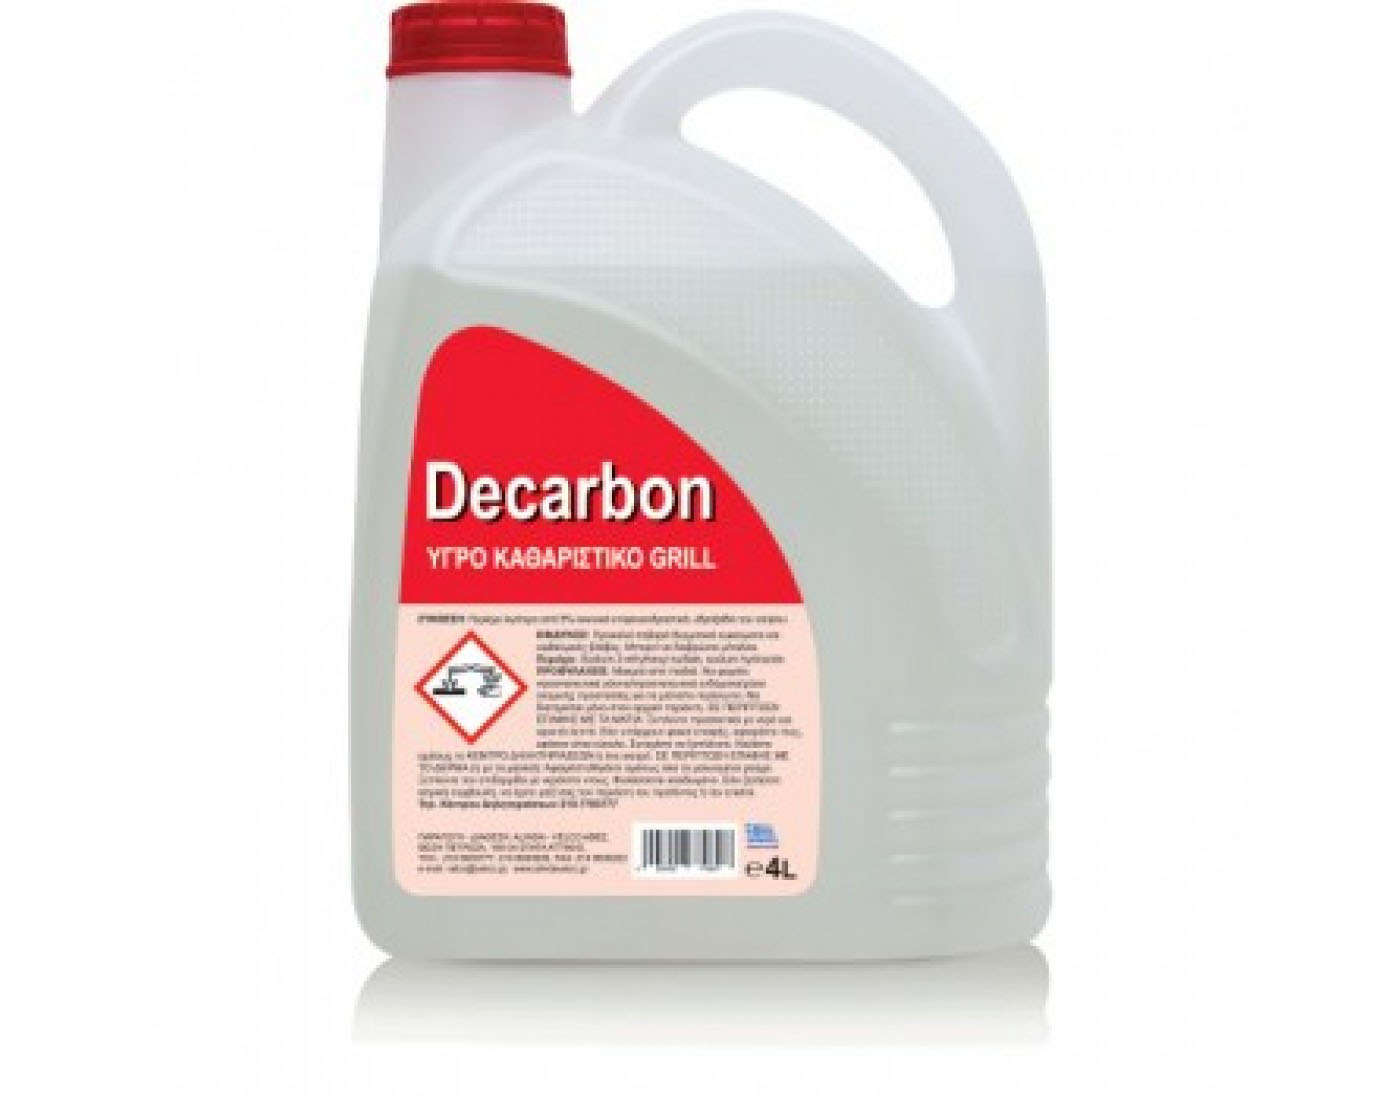 Decarbon cleaner Grill 4L